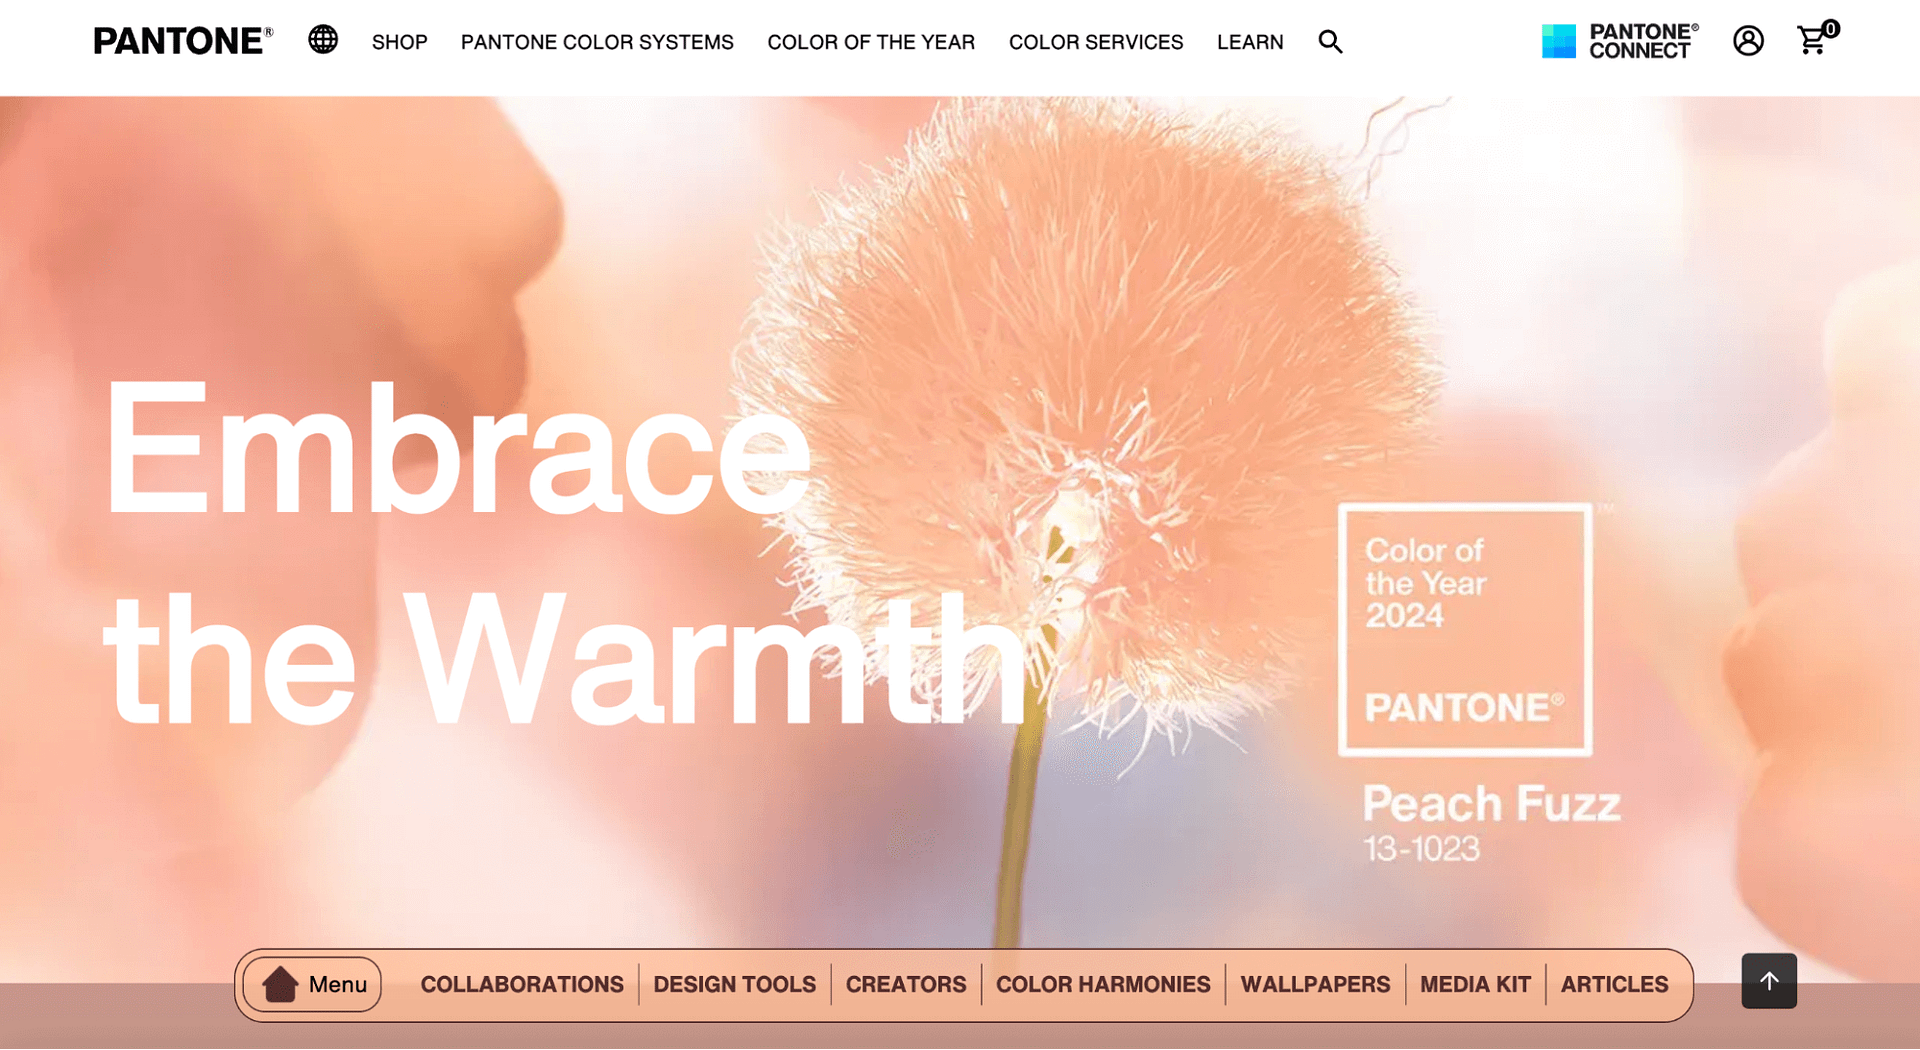 Pantone selected peach fuzz as its color of the year for 2024.